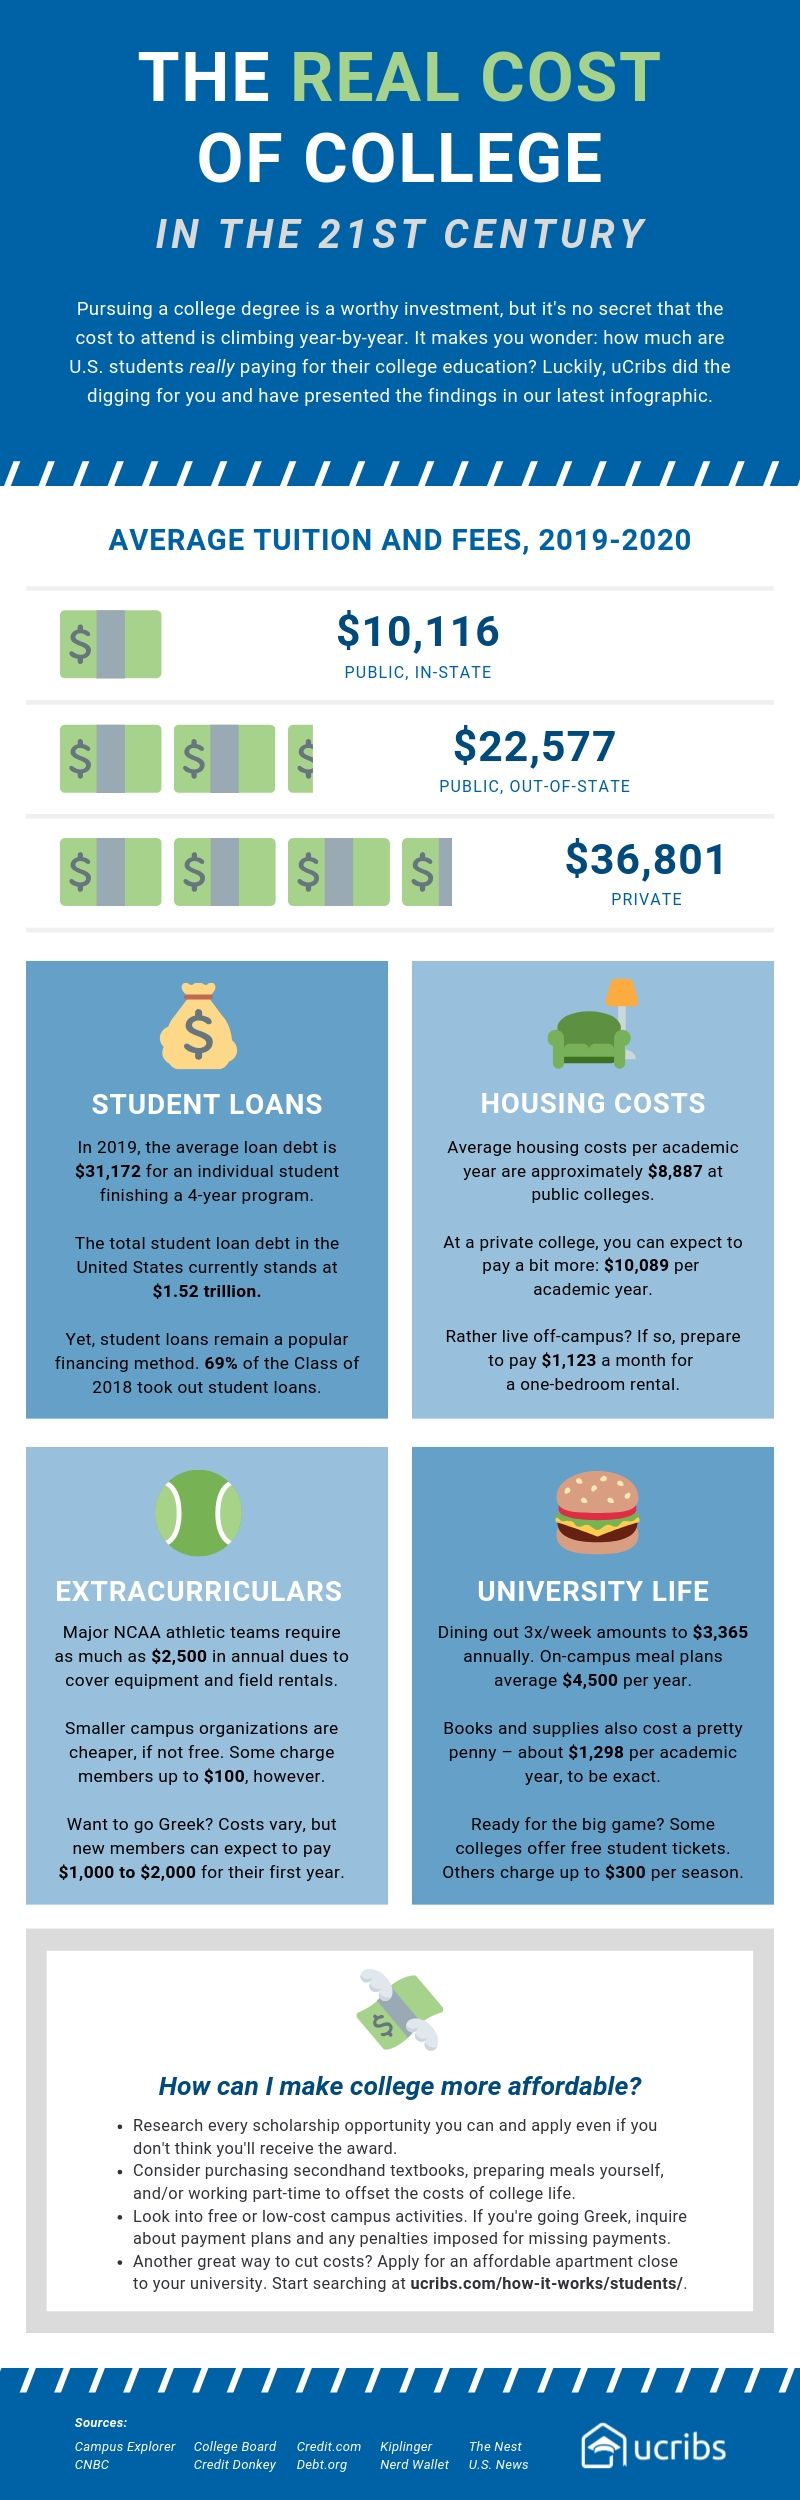 cost of college, college, university, education, finances, 21st century, tuition, books, living expenses, extracurriculars